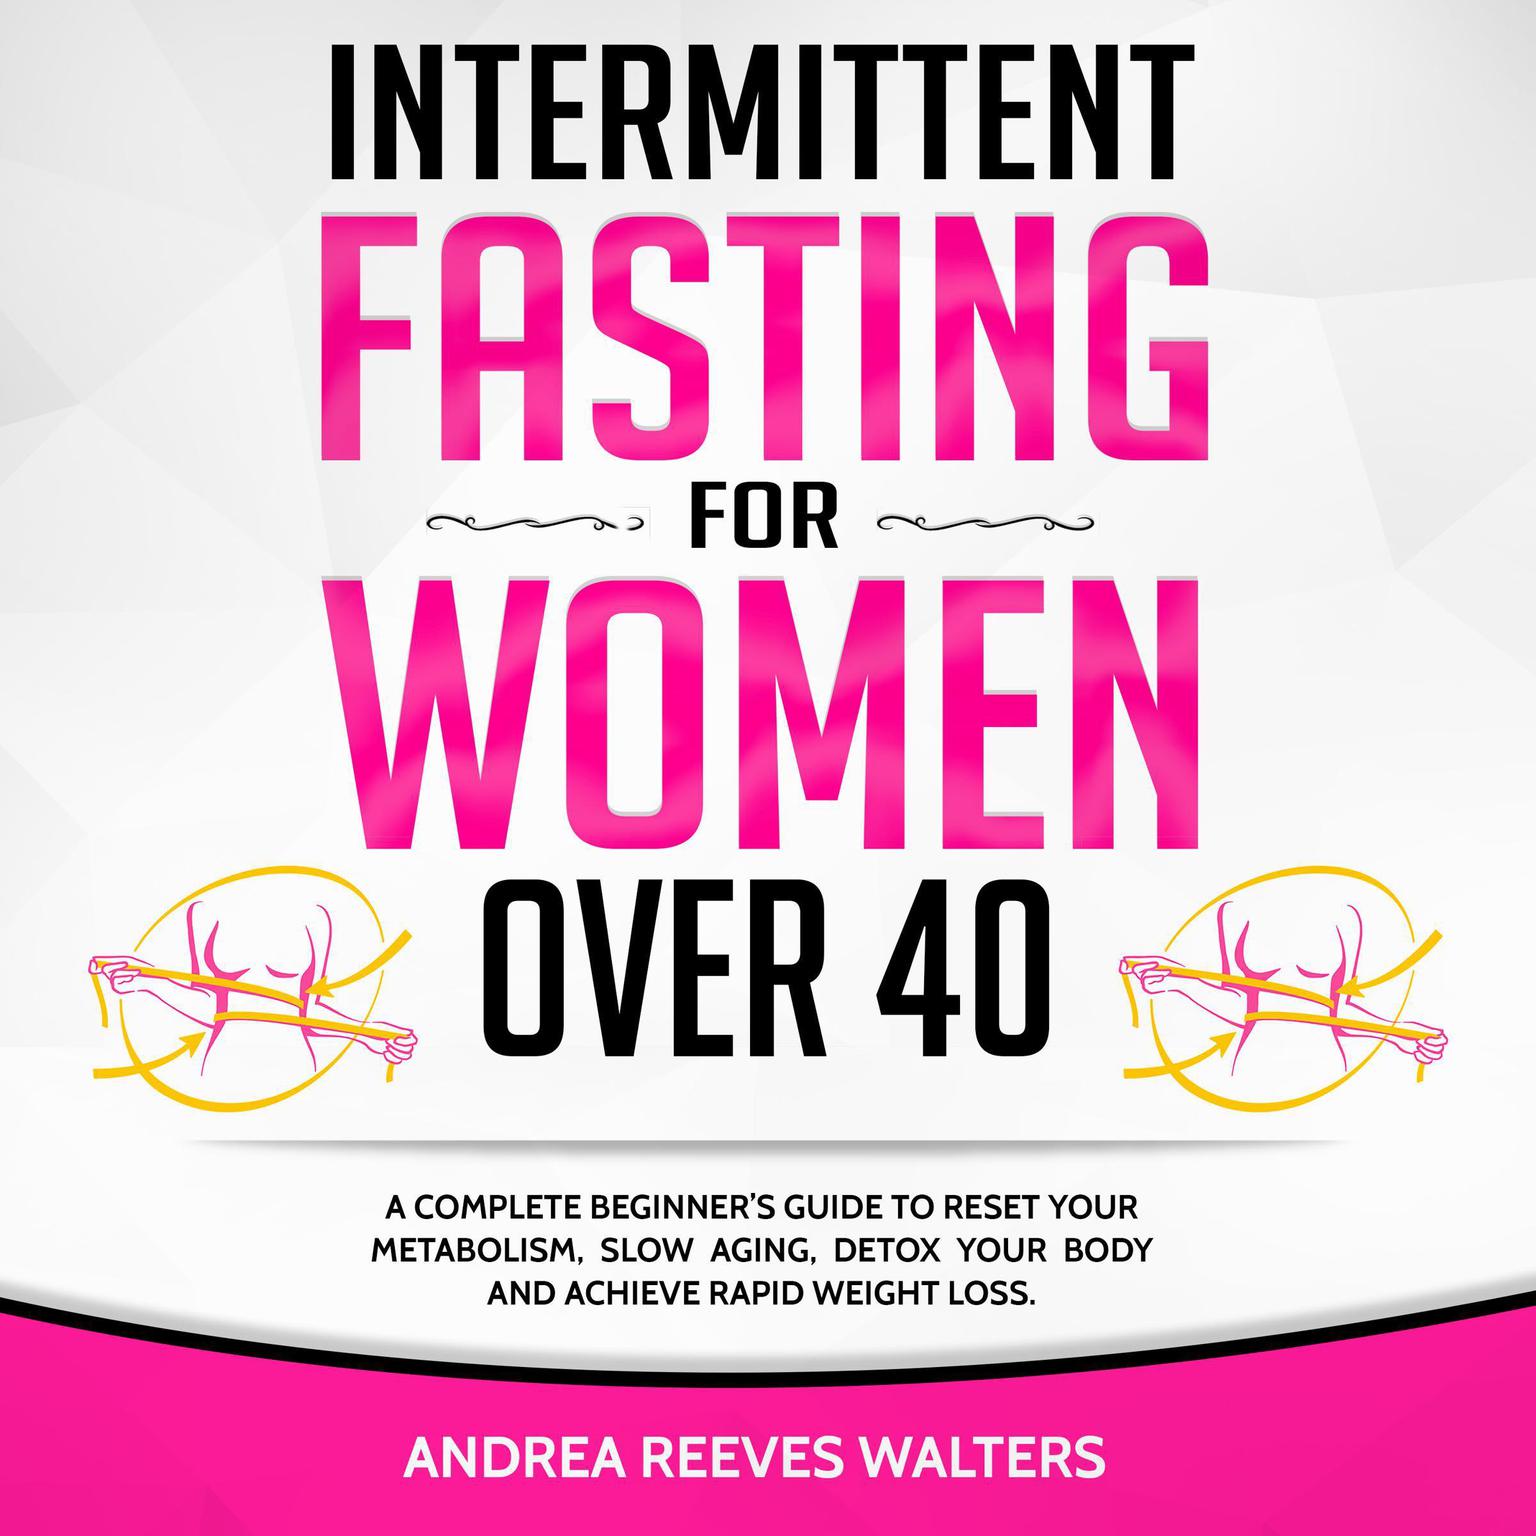 Intermittent Fasting for Women Over 40: A Complete Beginner’s Guide to Reset Your Metabolism, Slow Aging, Detox Your Body and Achieve Rapid Weight Loss Audiobook, by Andrea Reeves Walters